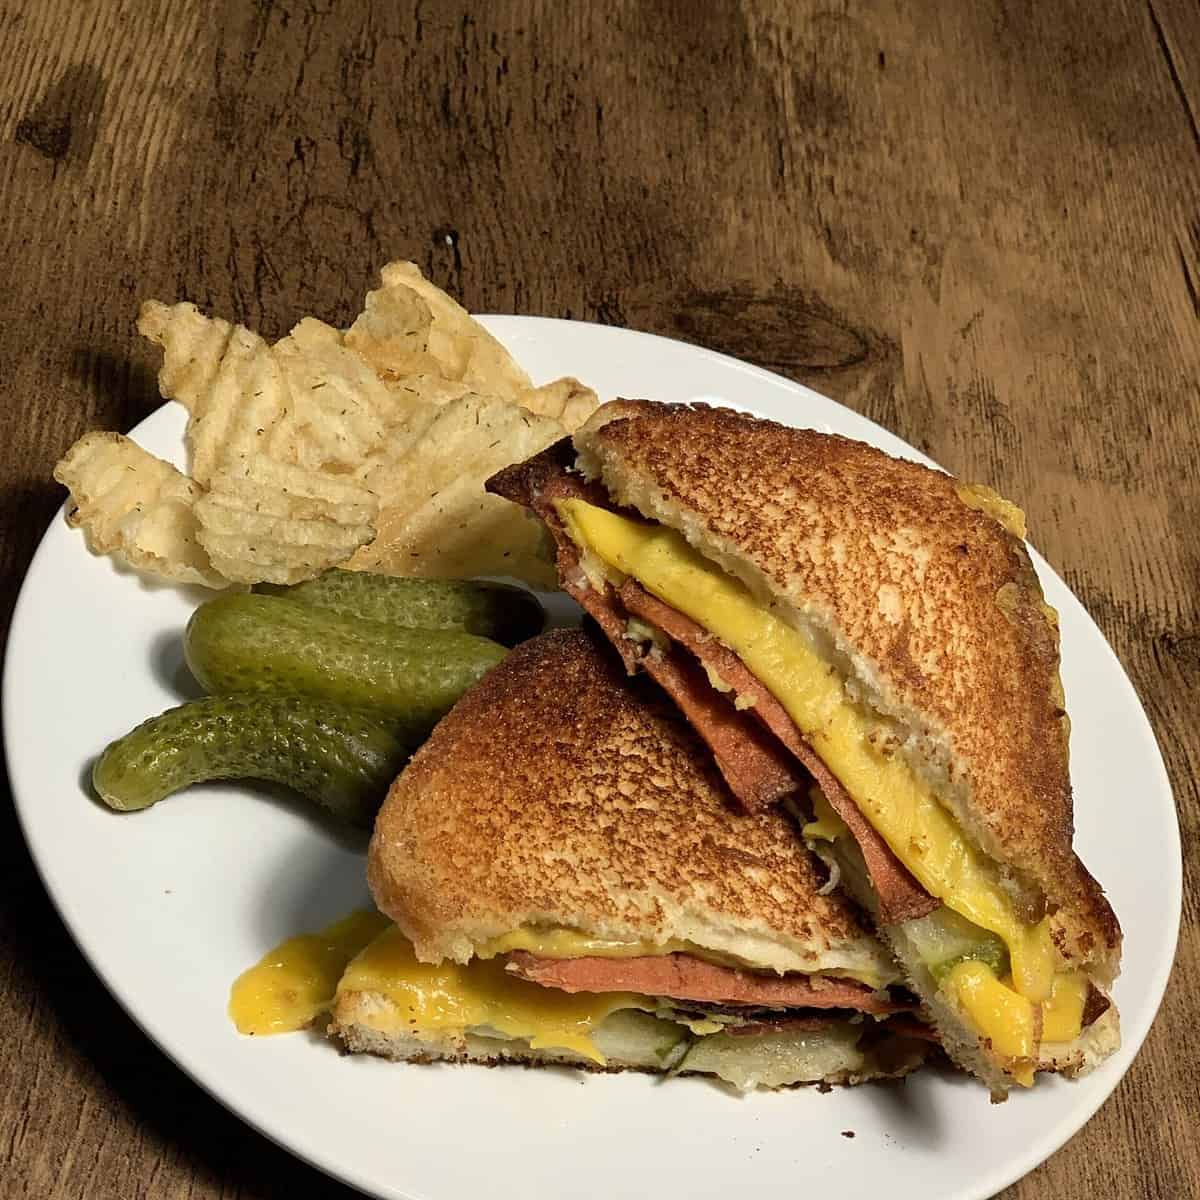  Who needs meat when you can have this veggie bologna sandwich?